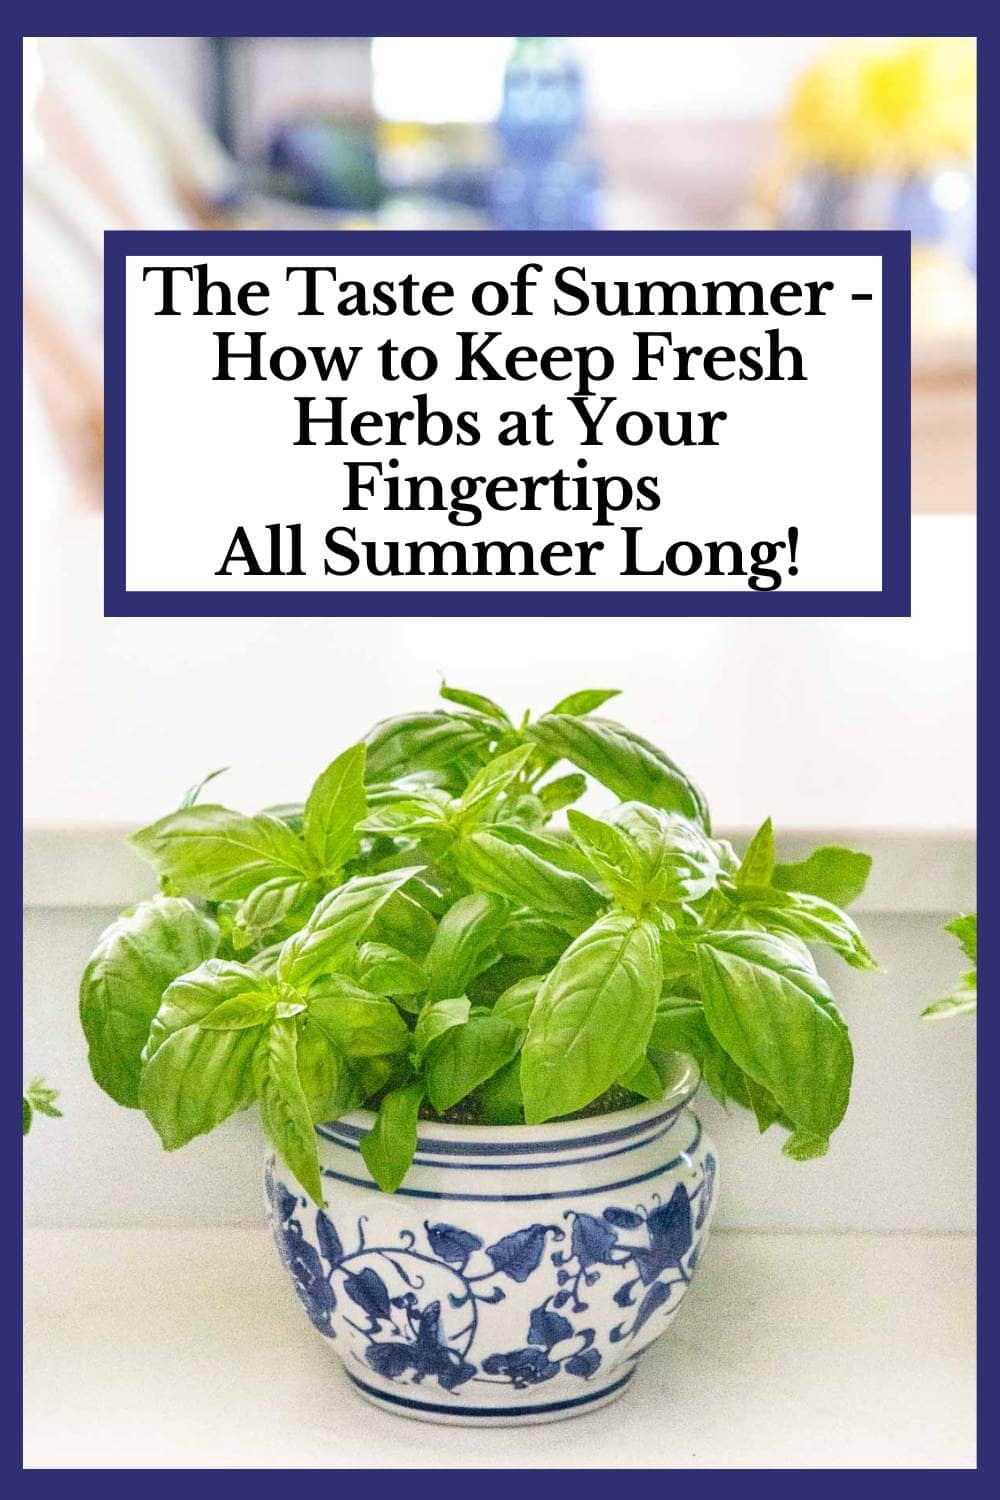 The Taste of Summer - How to Keep Fresh Herbs at Your Fingertips All Summer Long